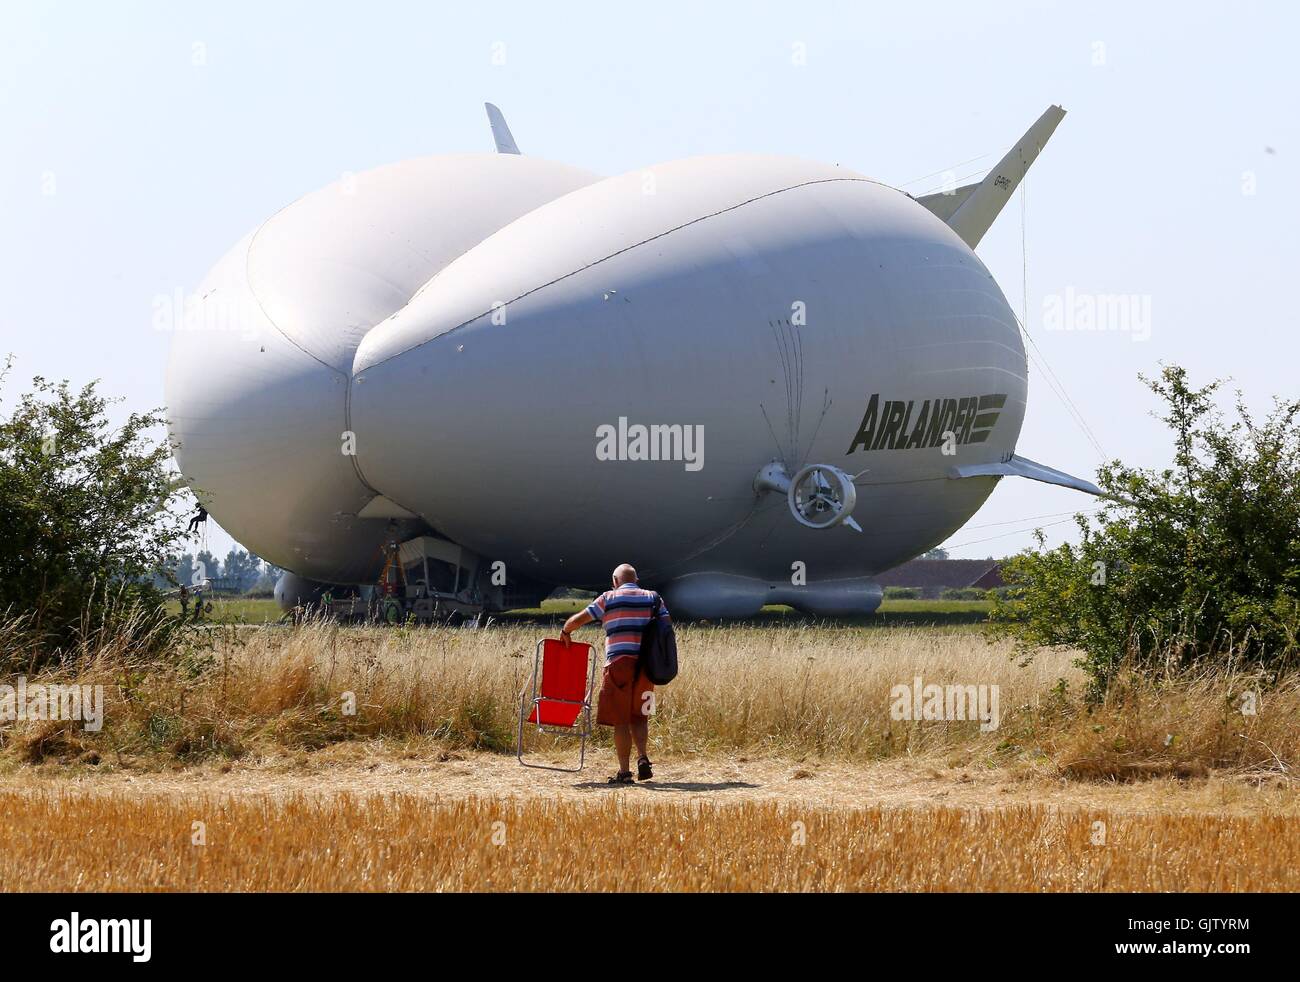 A man takes his seat as preparations are made for the maiden flight of the Airlander 10, the largest aircraft in the world, at Cardington airfield in Bedfordshire. Stock Photo